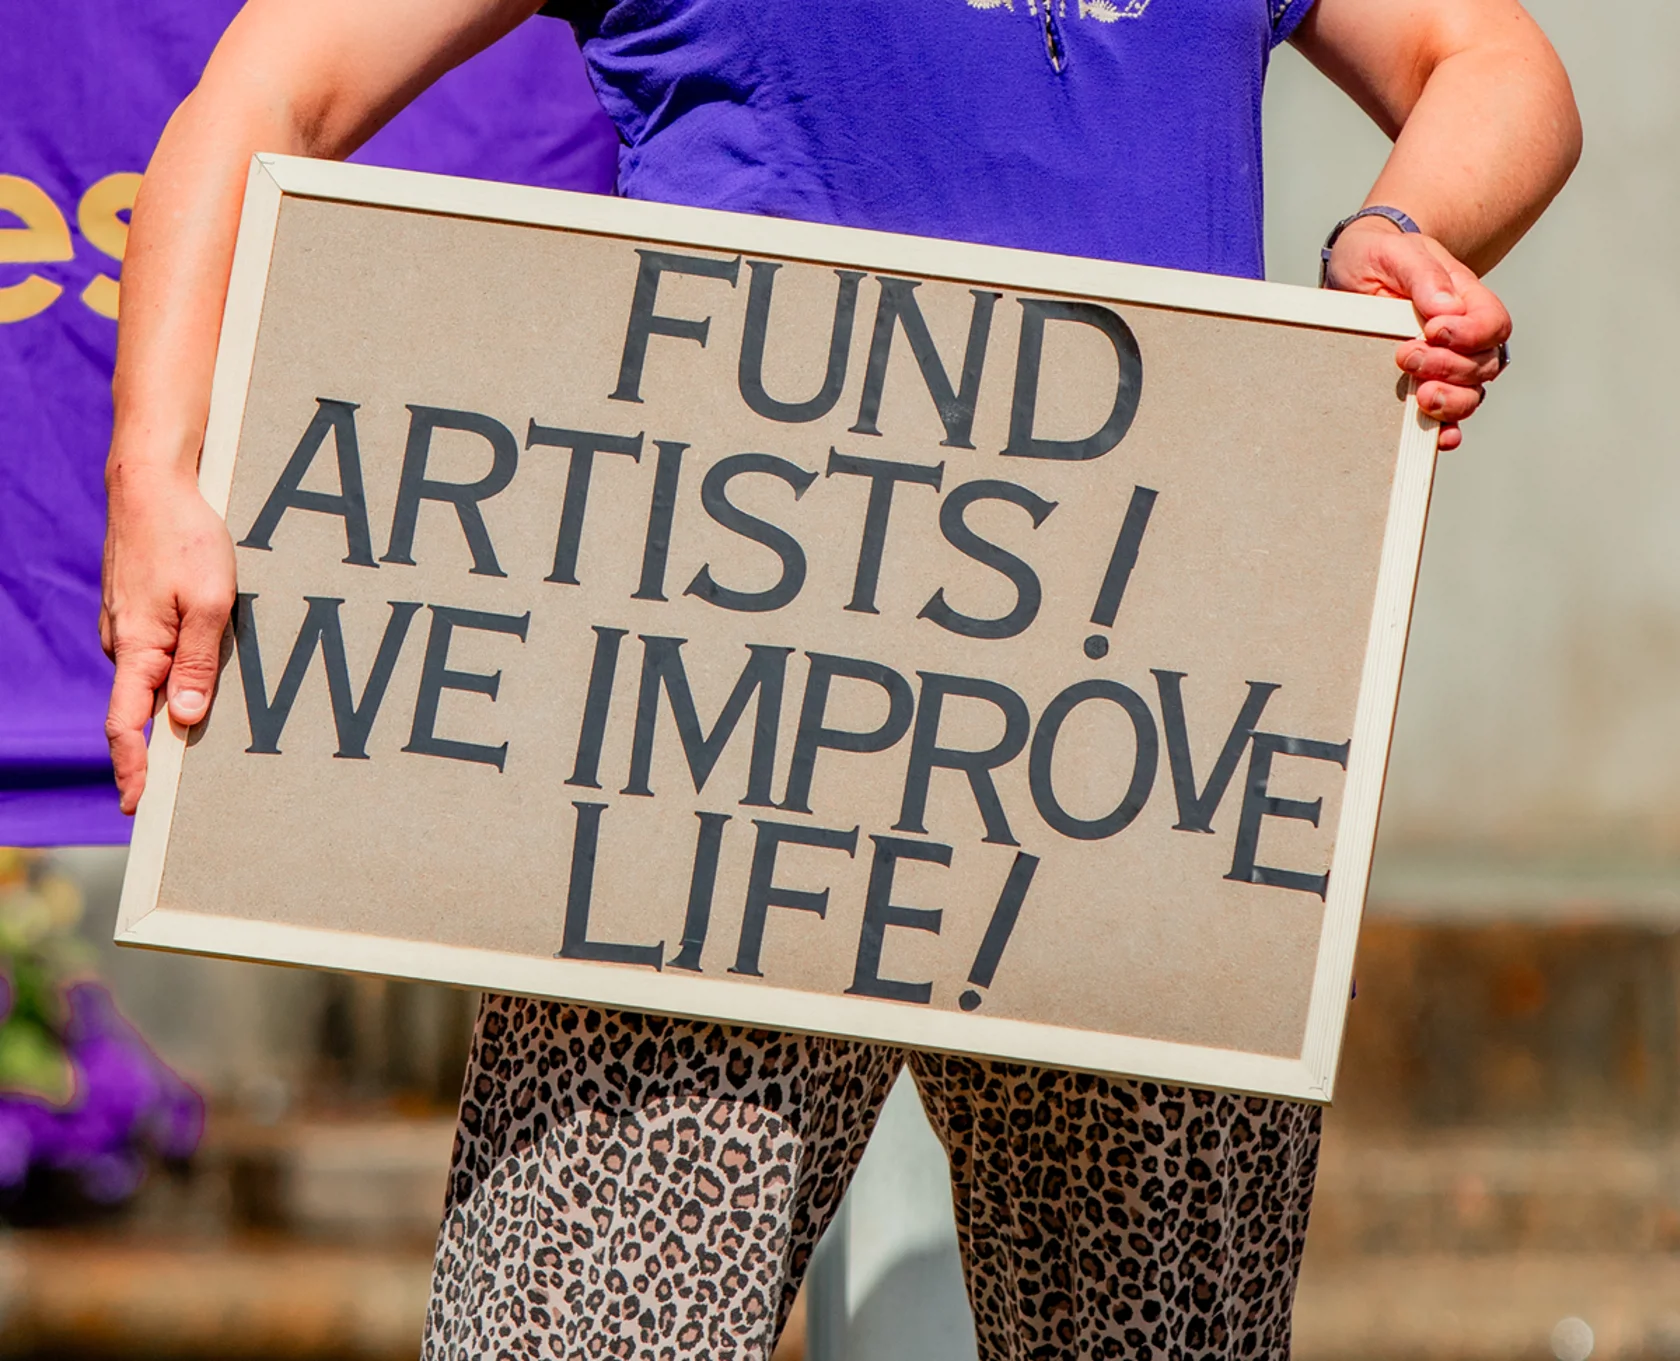 Sign saying "fund artists we improve life"